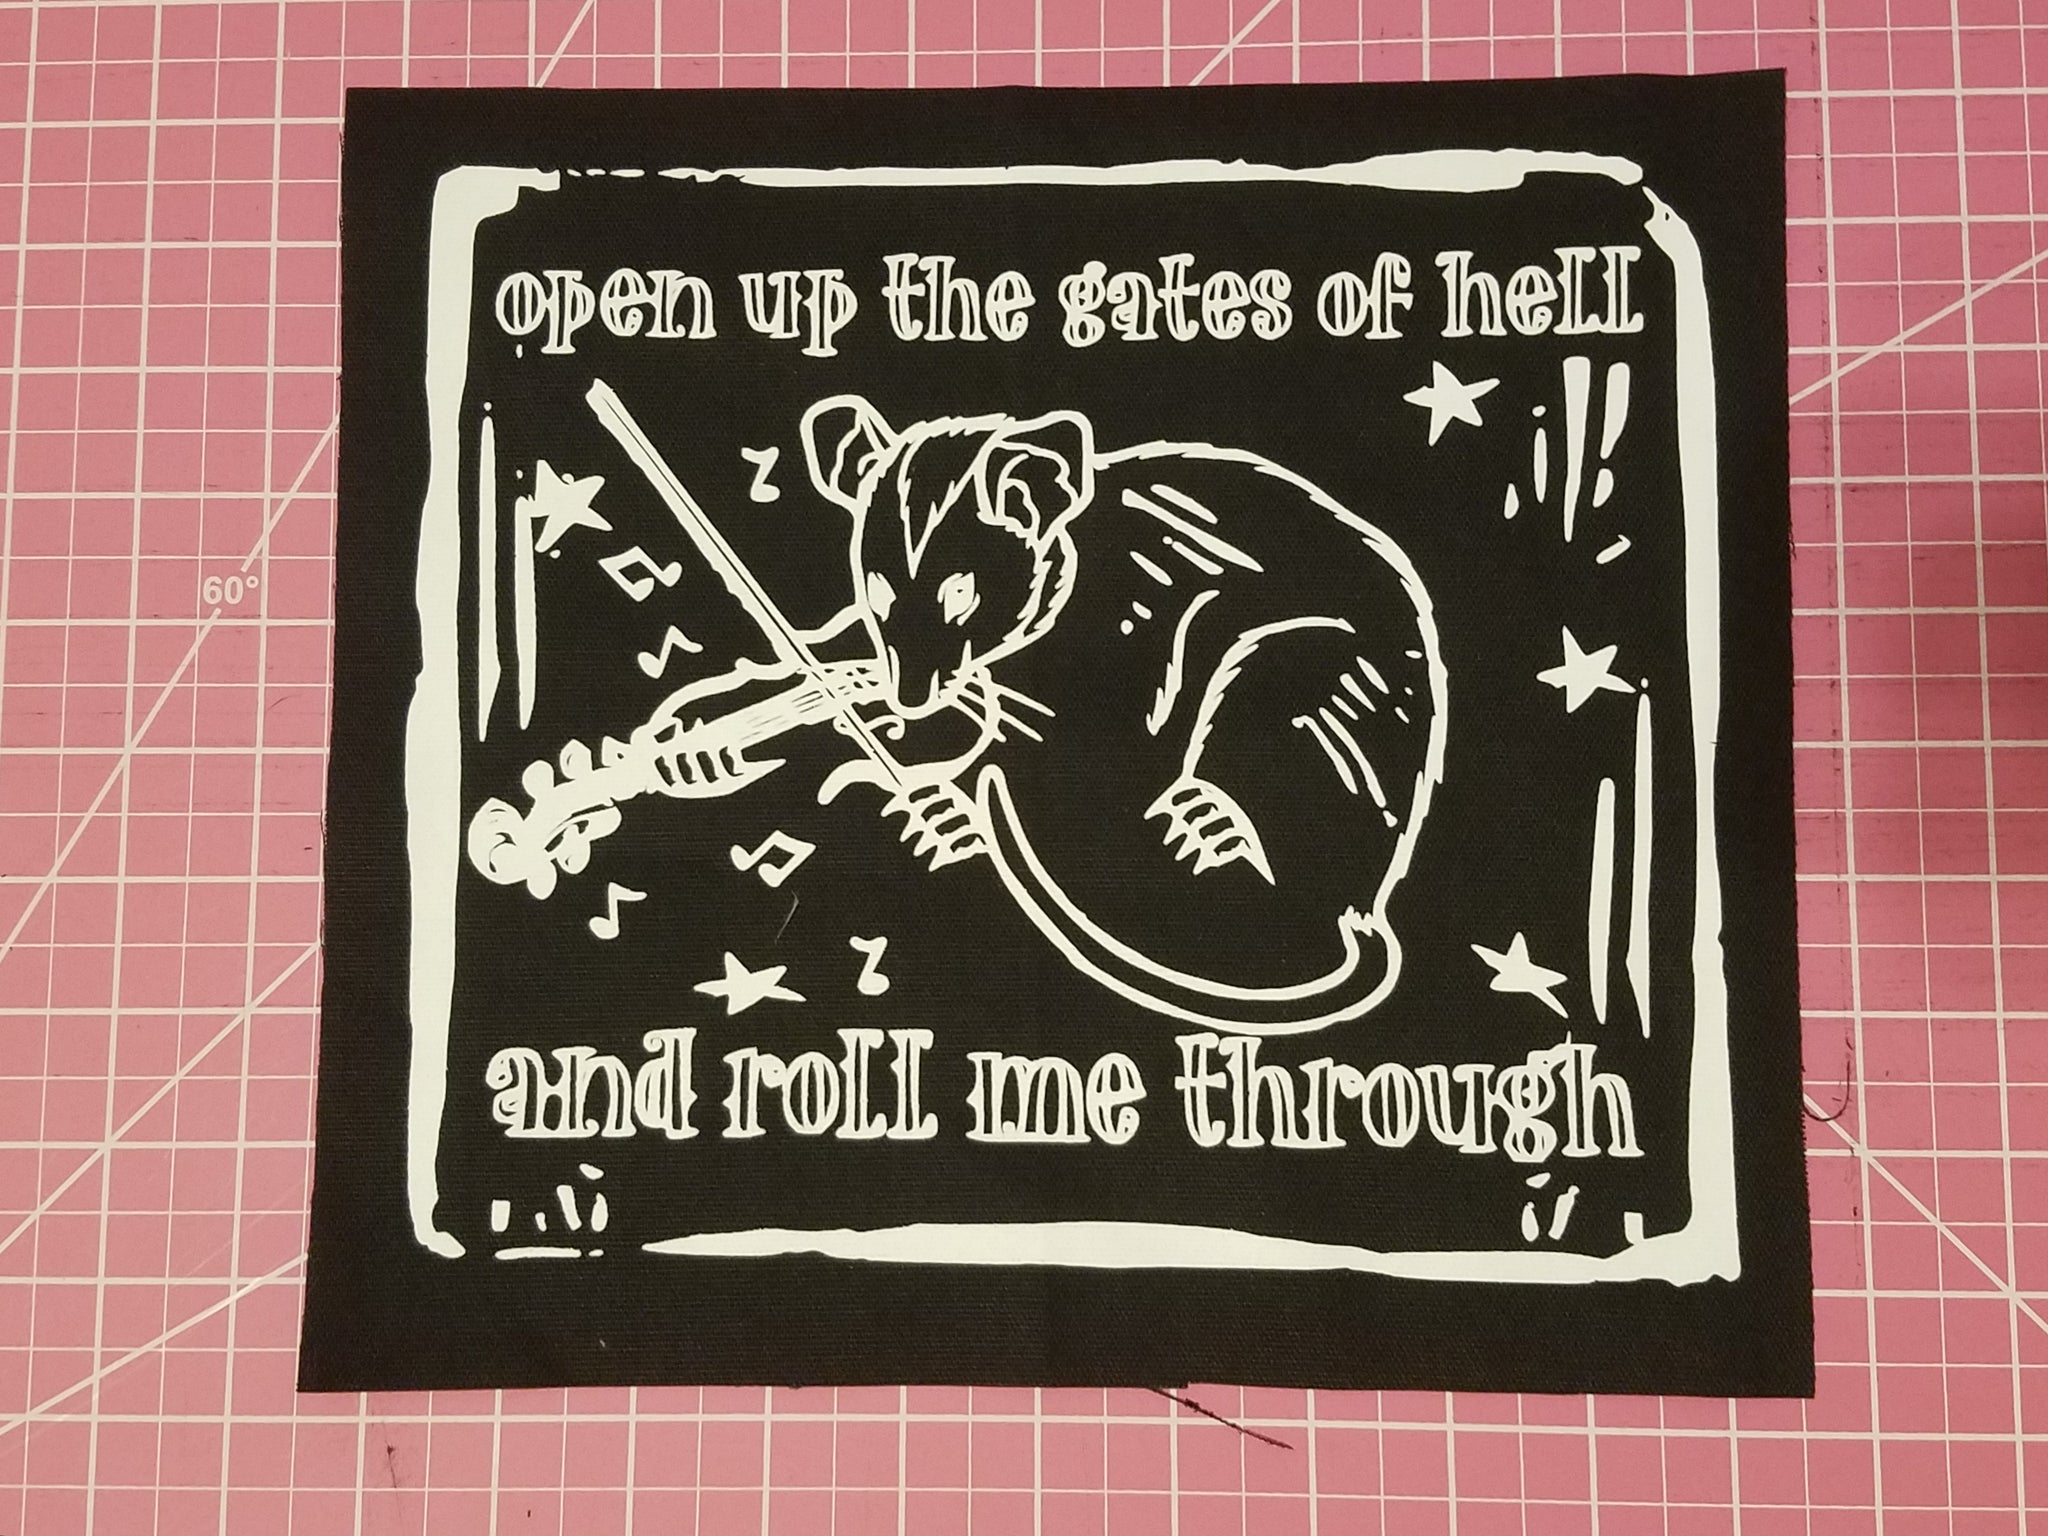 Folk Punk Possum "Open Up the Gates of Hell" sew-on back patch